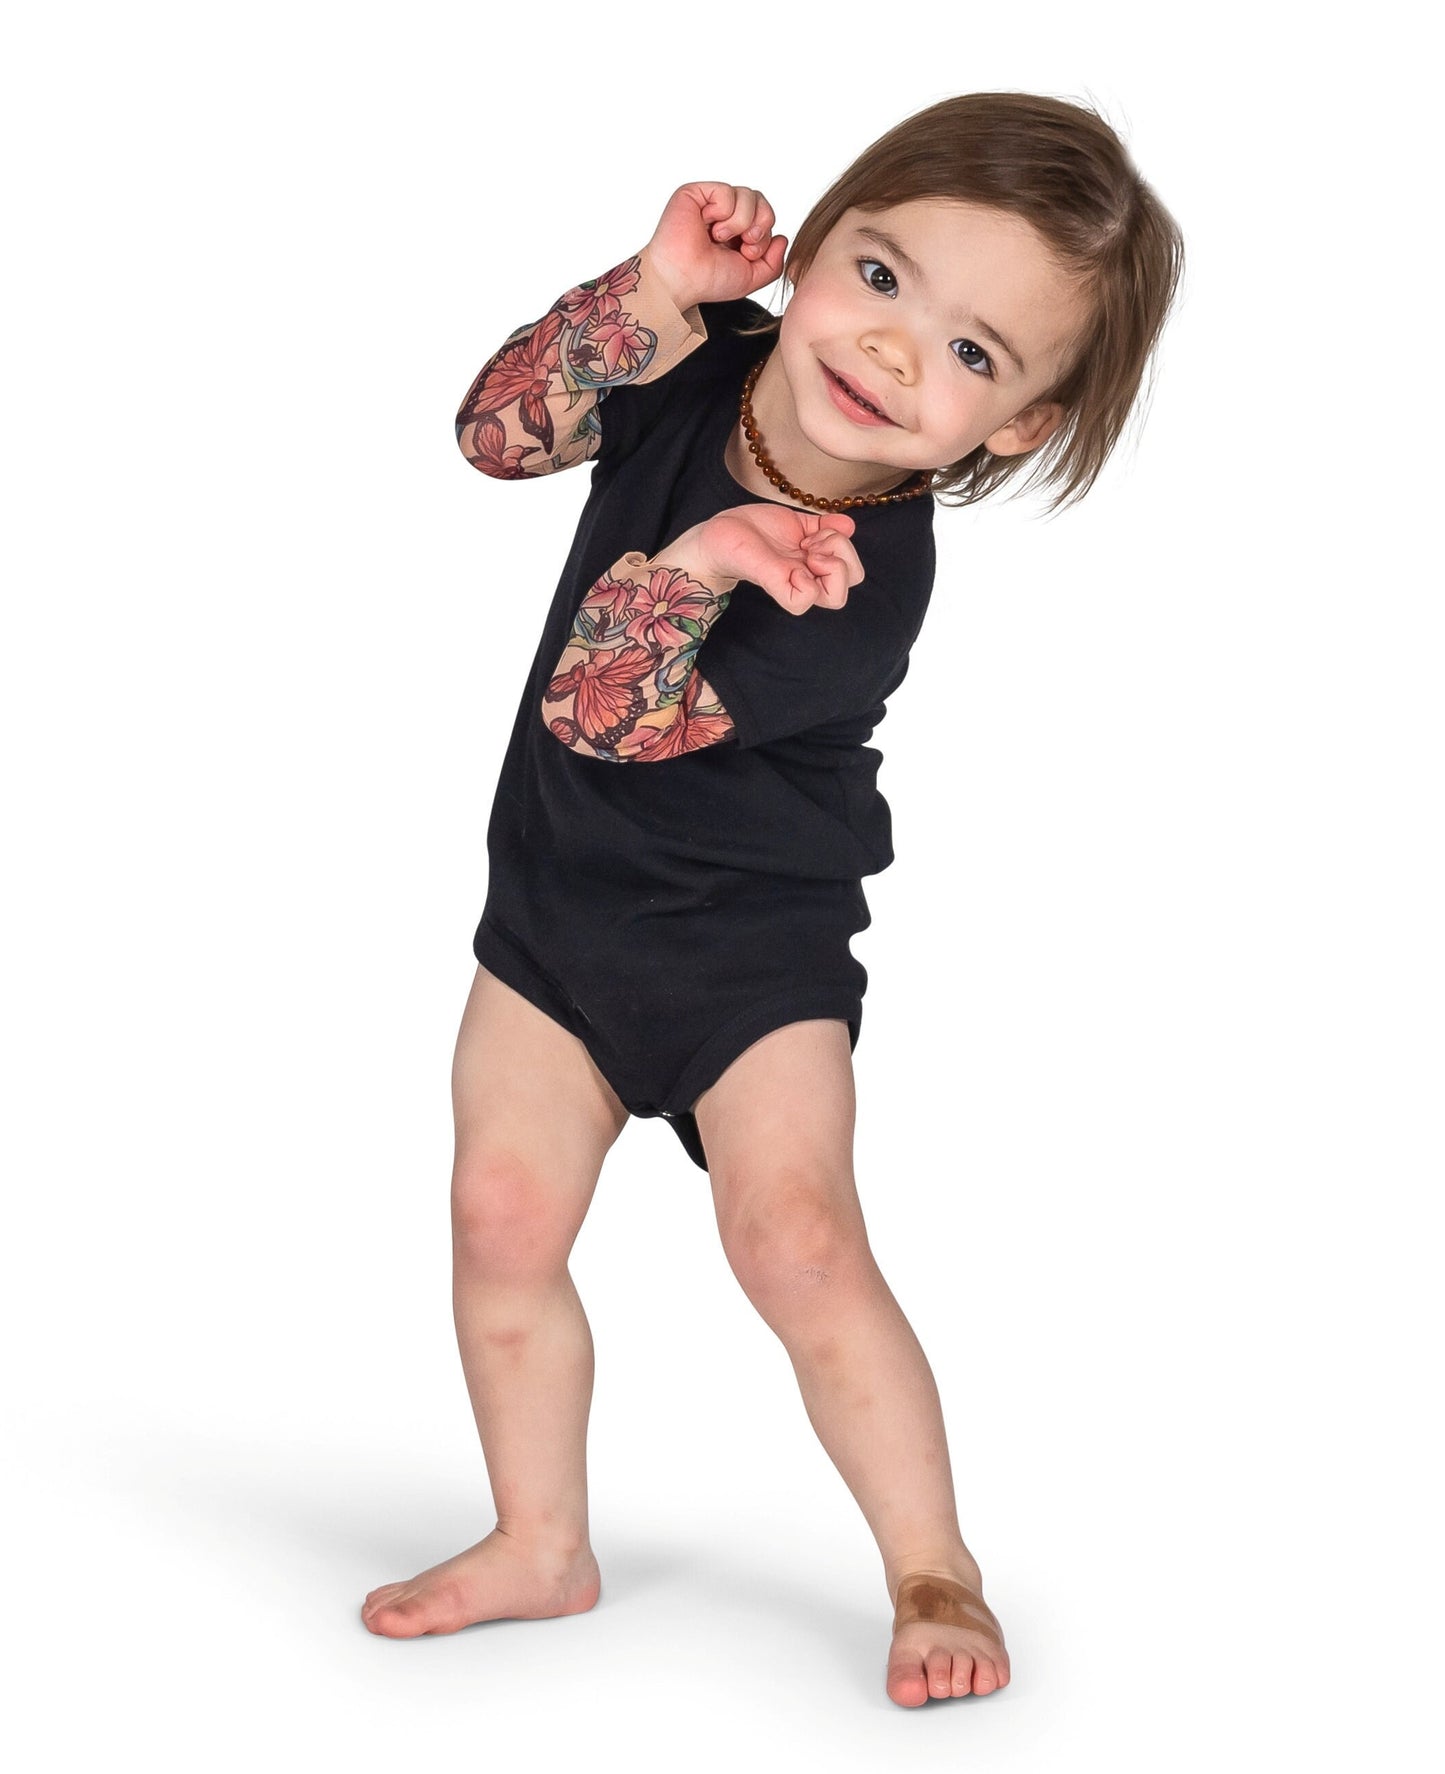 Butterfly Baby Tattoo Shirt (Bodysuit with Tattoo Sleeves)